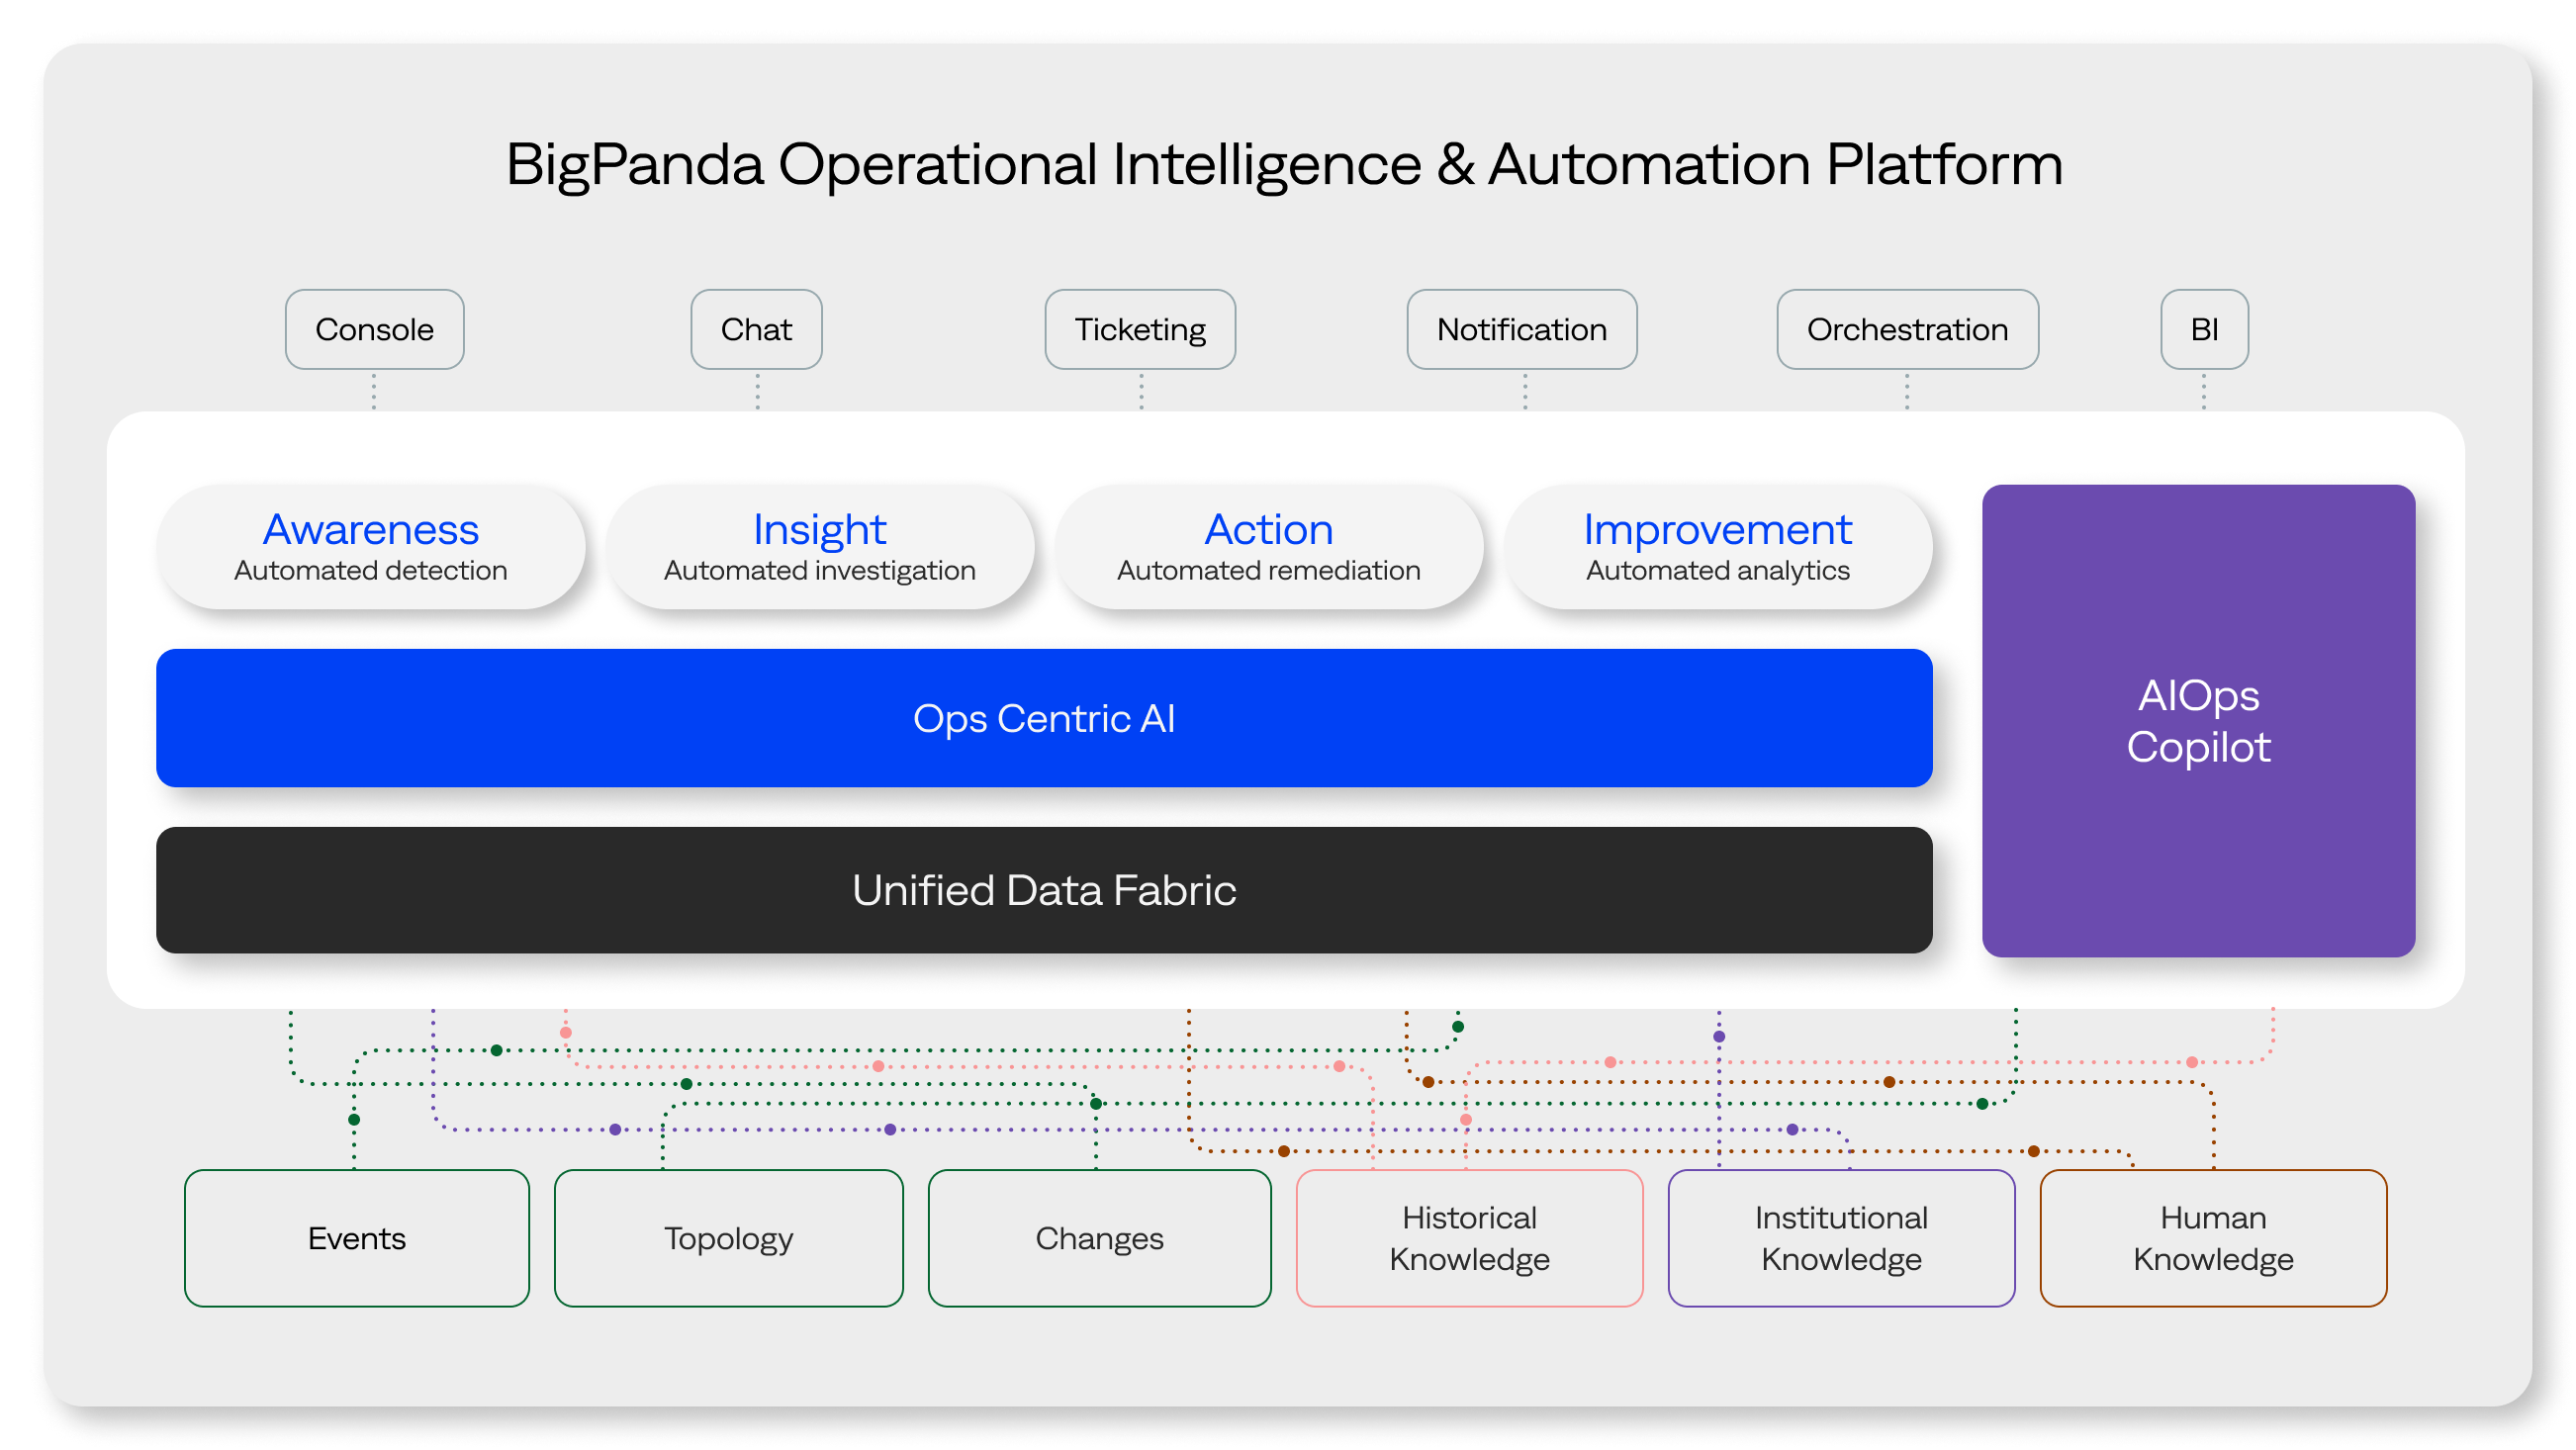 The structure of the BigPanda Operational Intelligence and Automation Platform